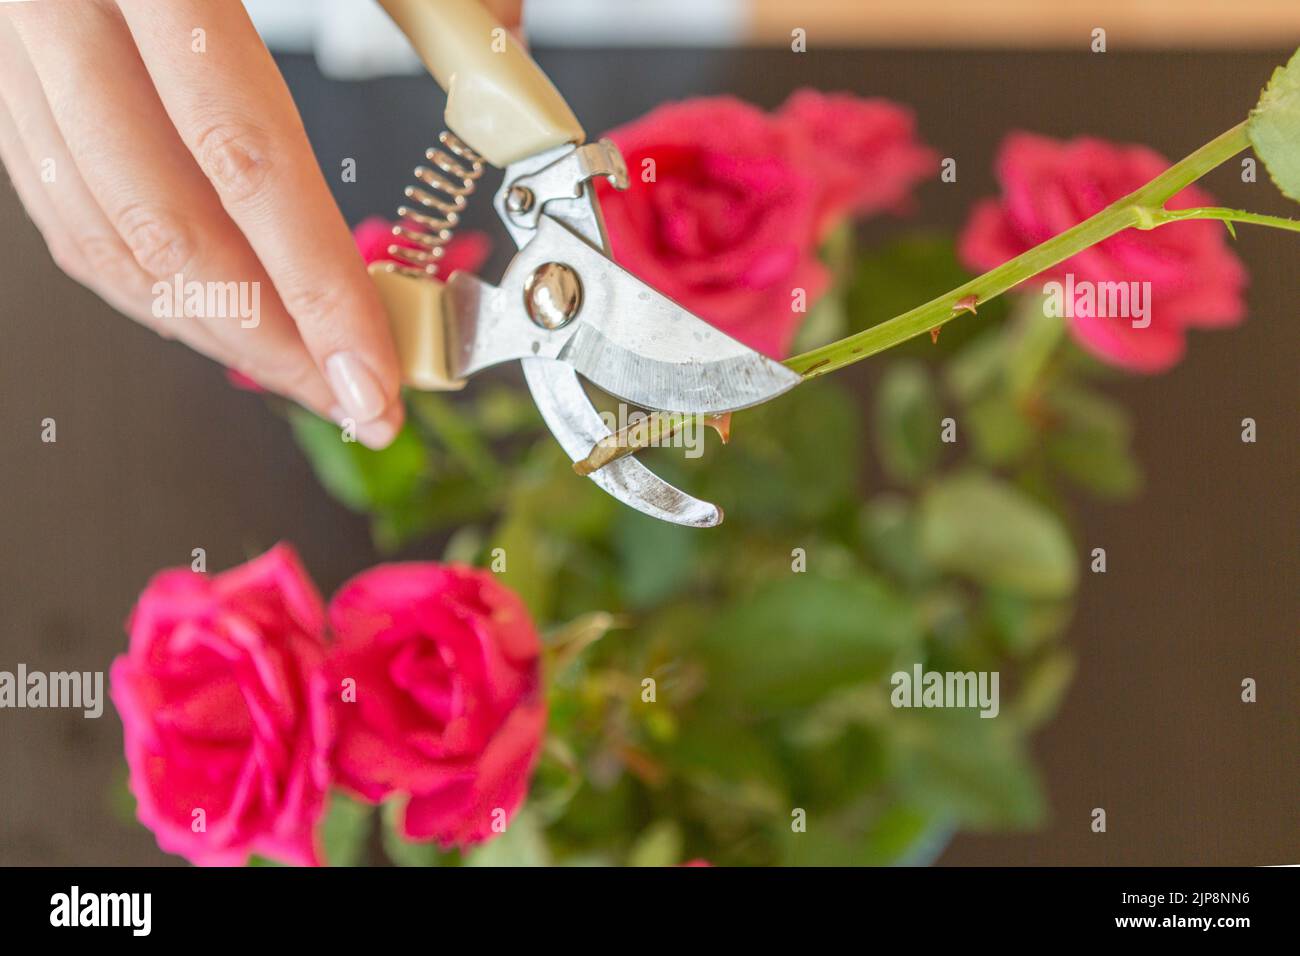 Womans hands cutting home a rose. Stock Photo